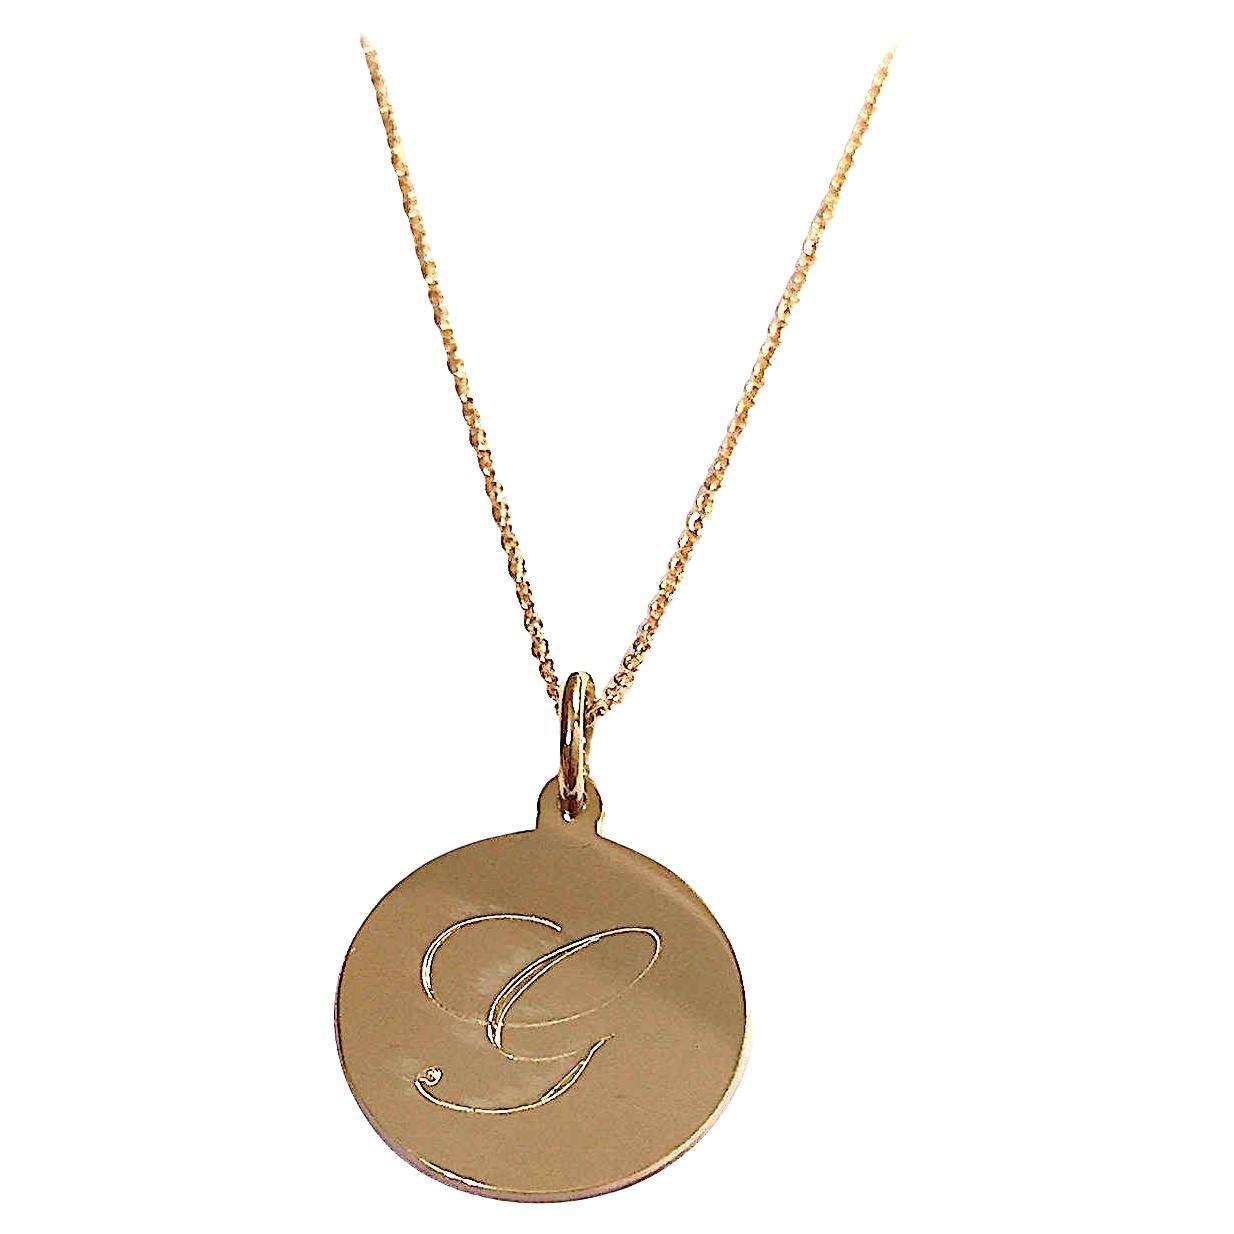 Beautiful Personalized Engraved Gold Circle Pendant and Chain For Sale